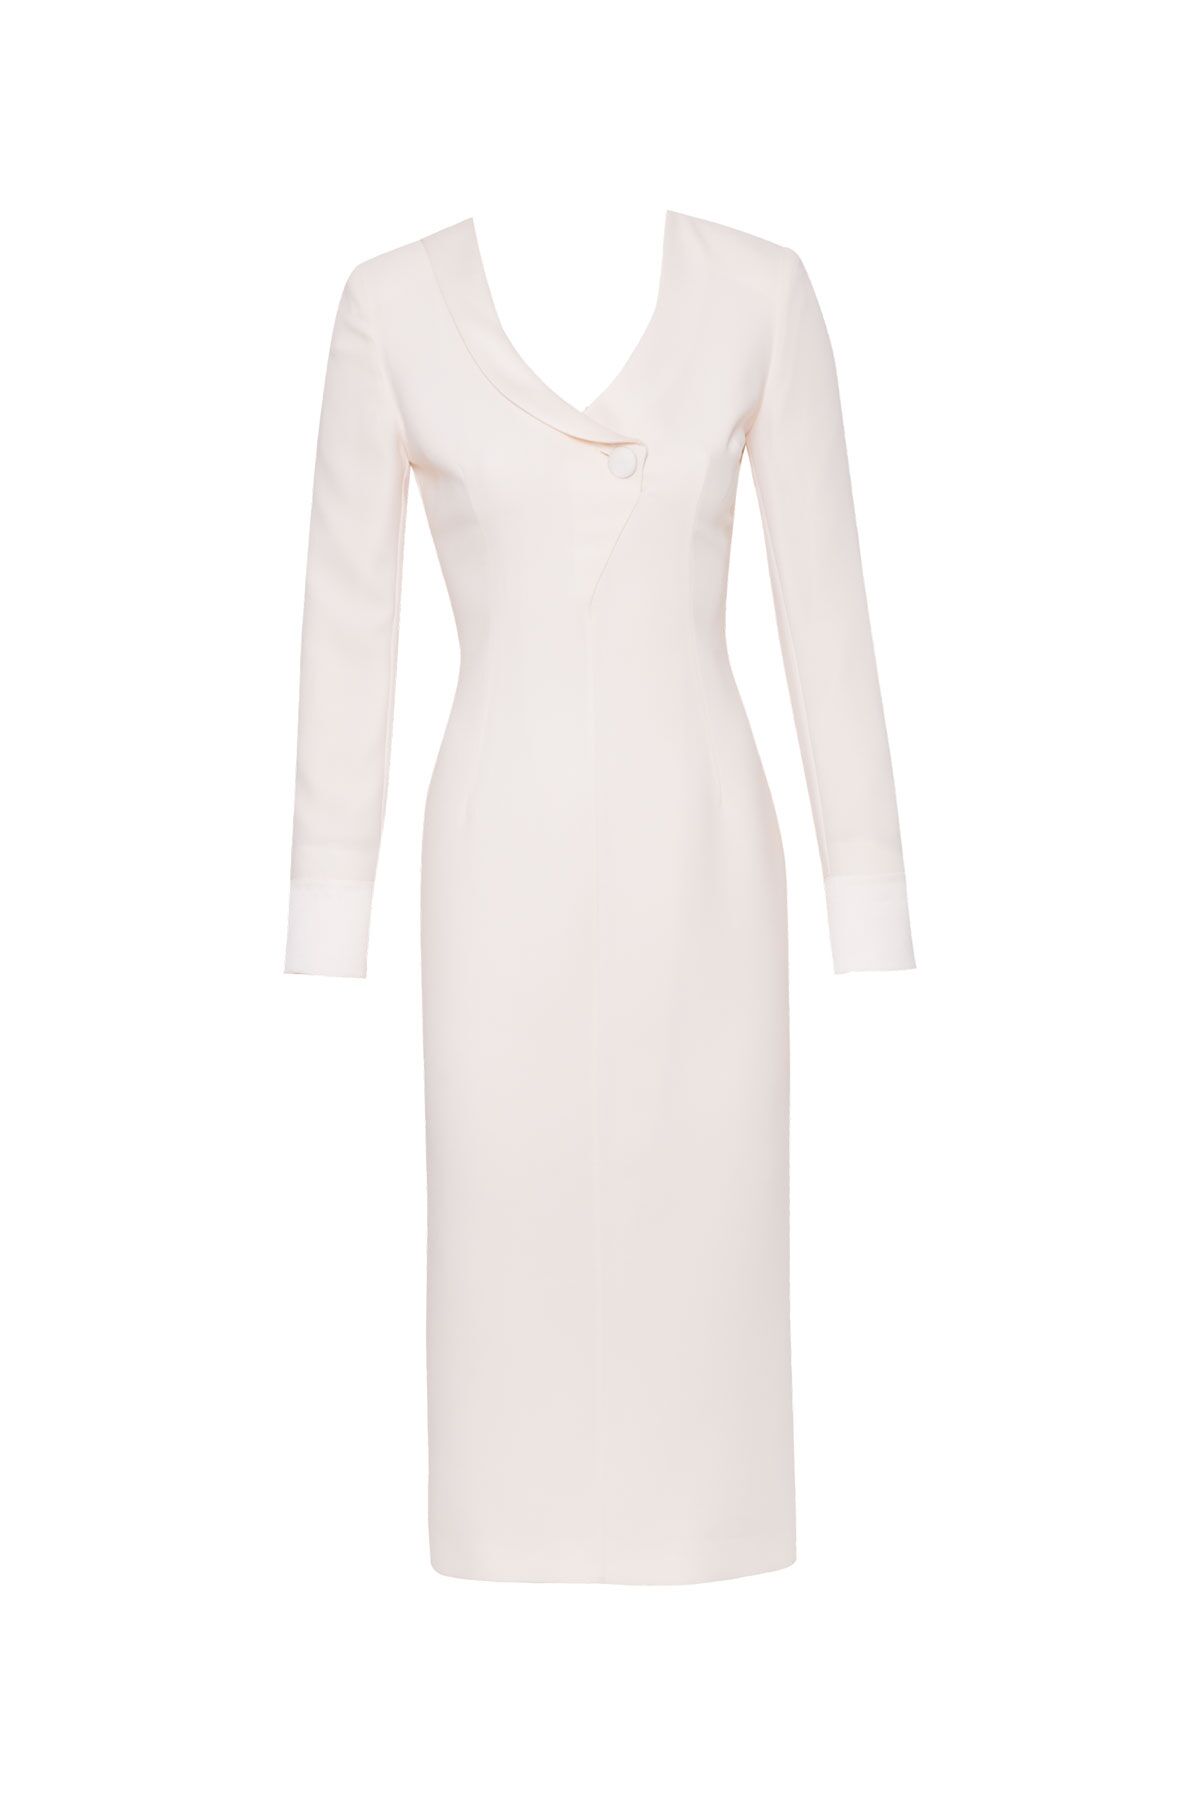 GIZIAGATE - Long Sleeve Belt Fitted Classic Beige Dress